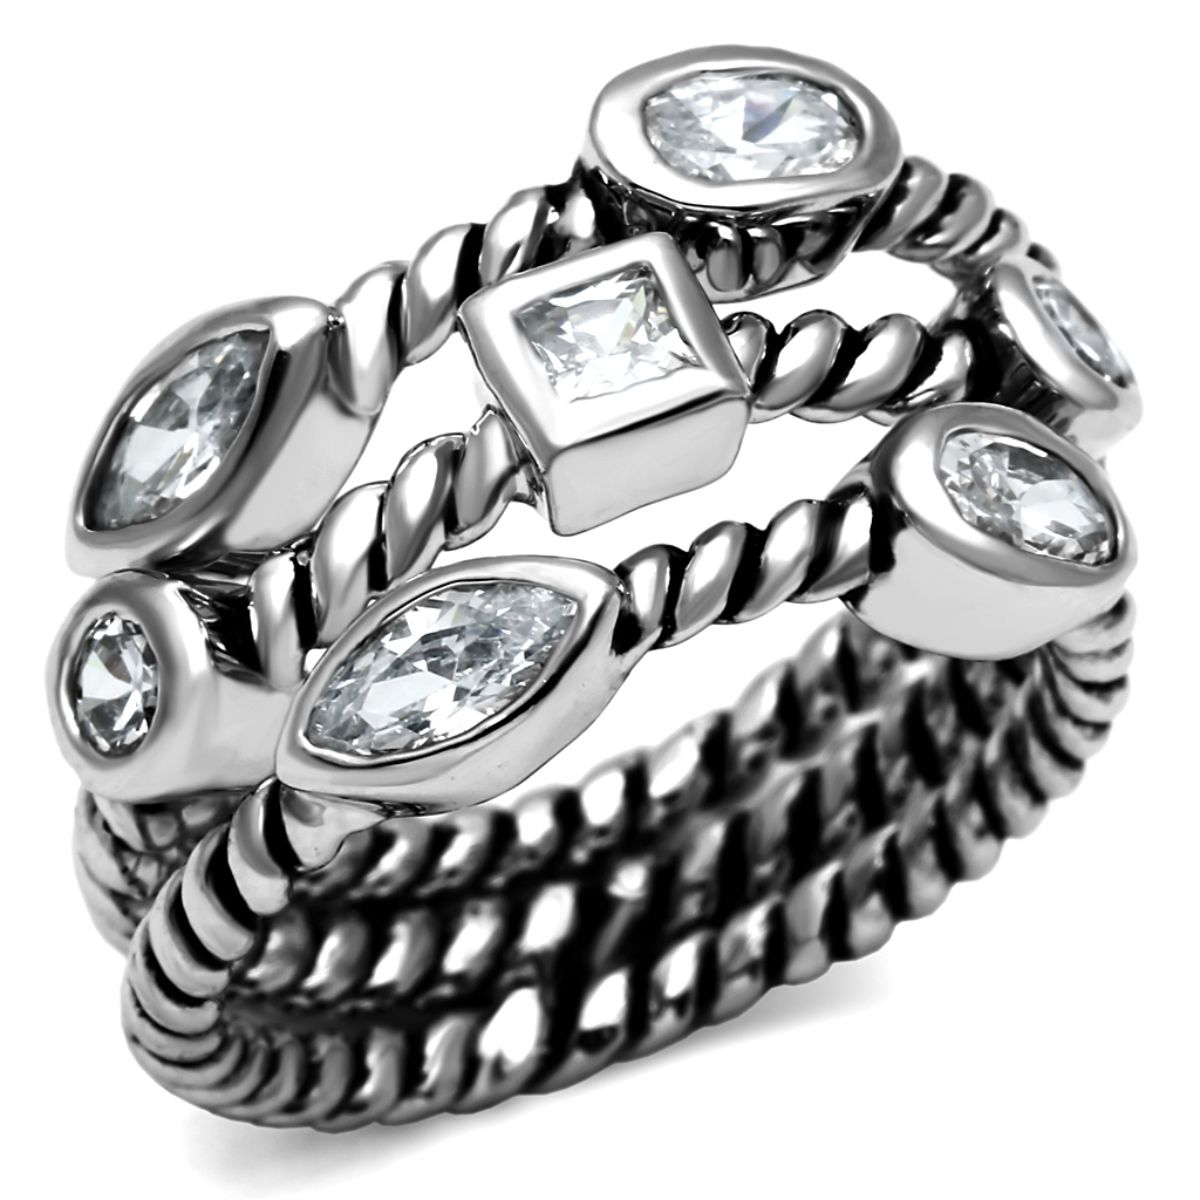 Luxe Jewelry Designs 3-Piece Women's Stainless Steel Stackable Ring Set with Cubic Zirconia, Size 8